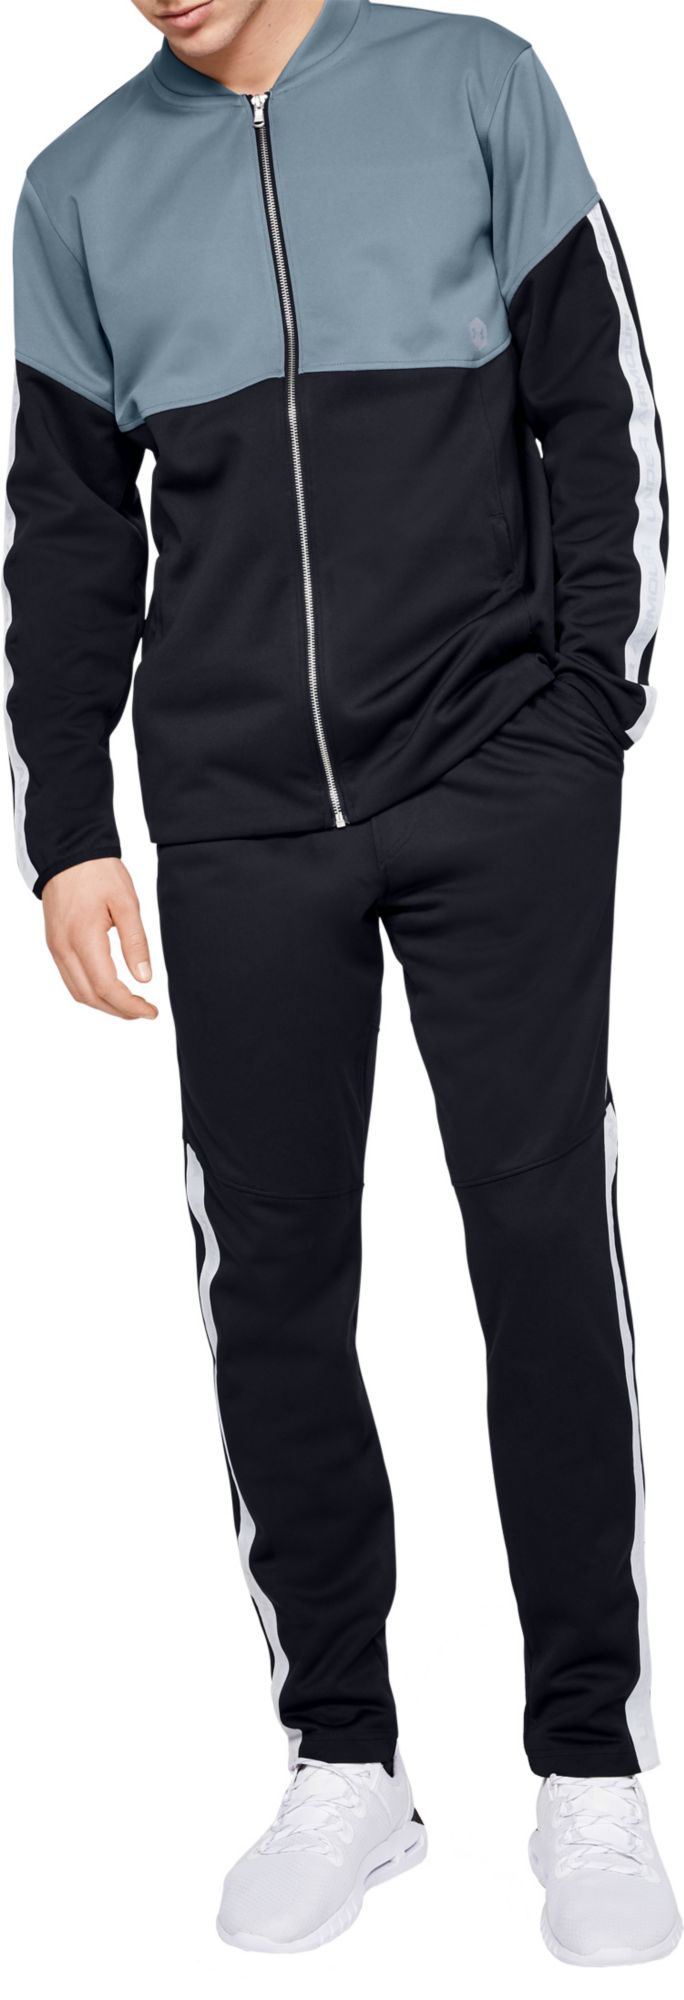 under armour athlete recovery jacket